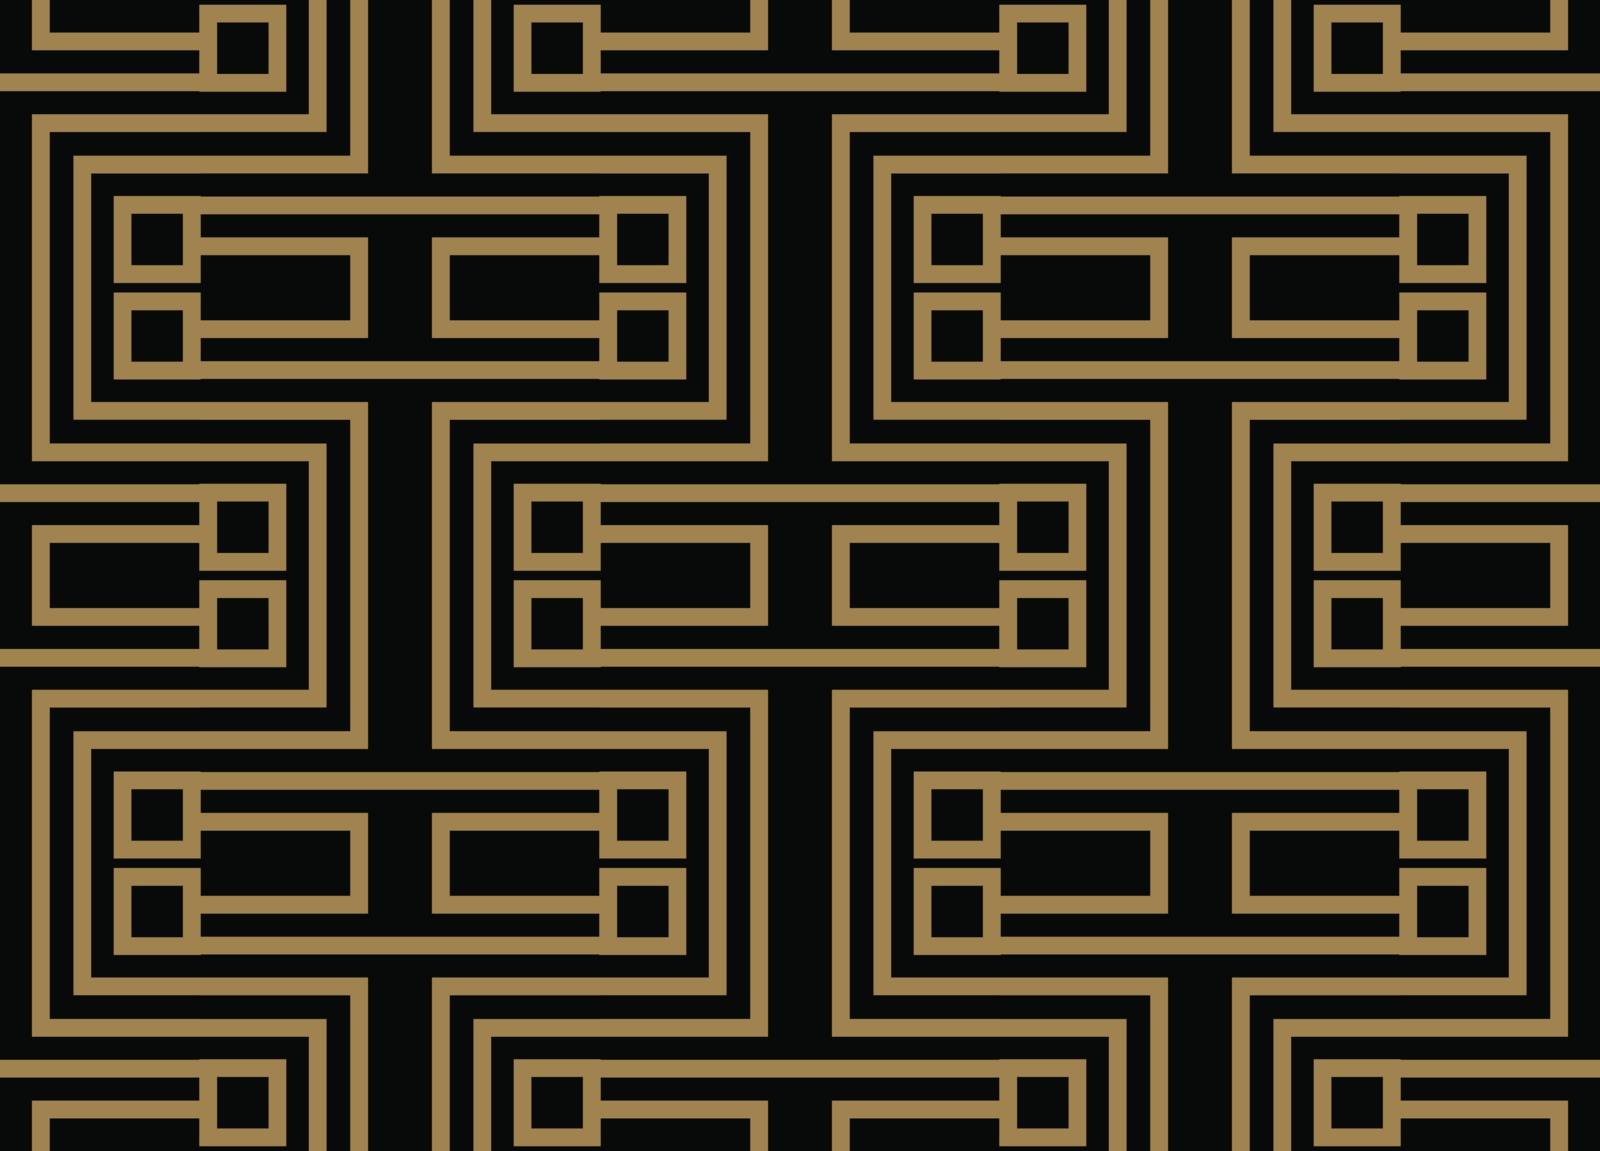 Seamless pattern with squares, black gold diagonal braided striped lines. Vector ornamental background. Futuristic vibrant design.